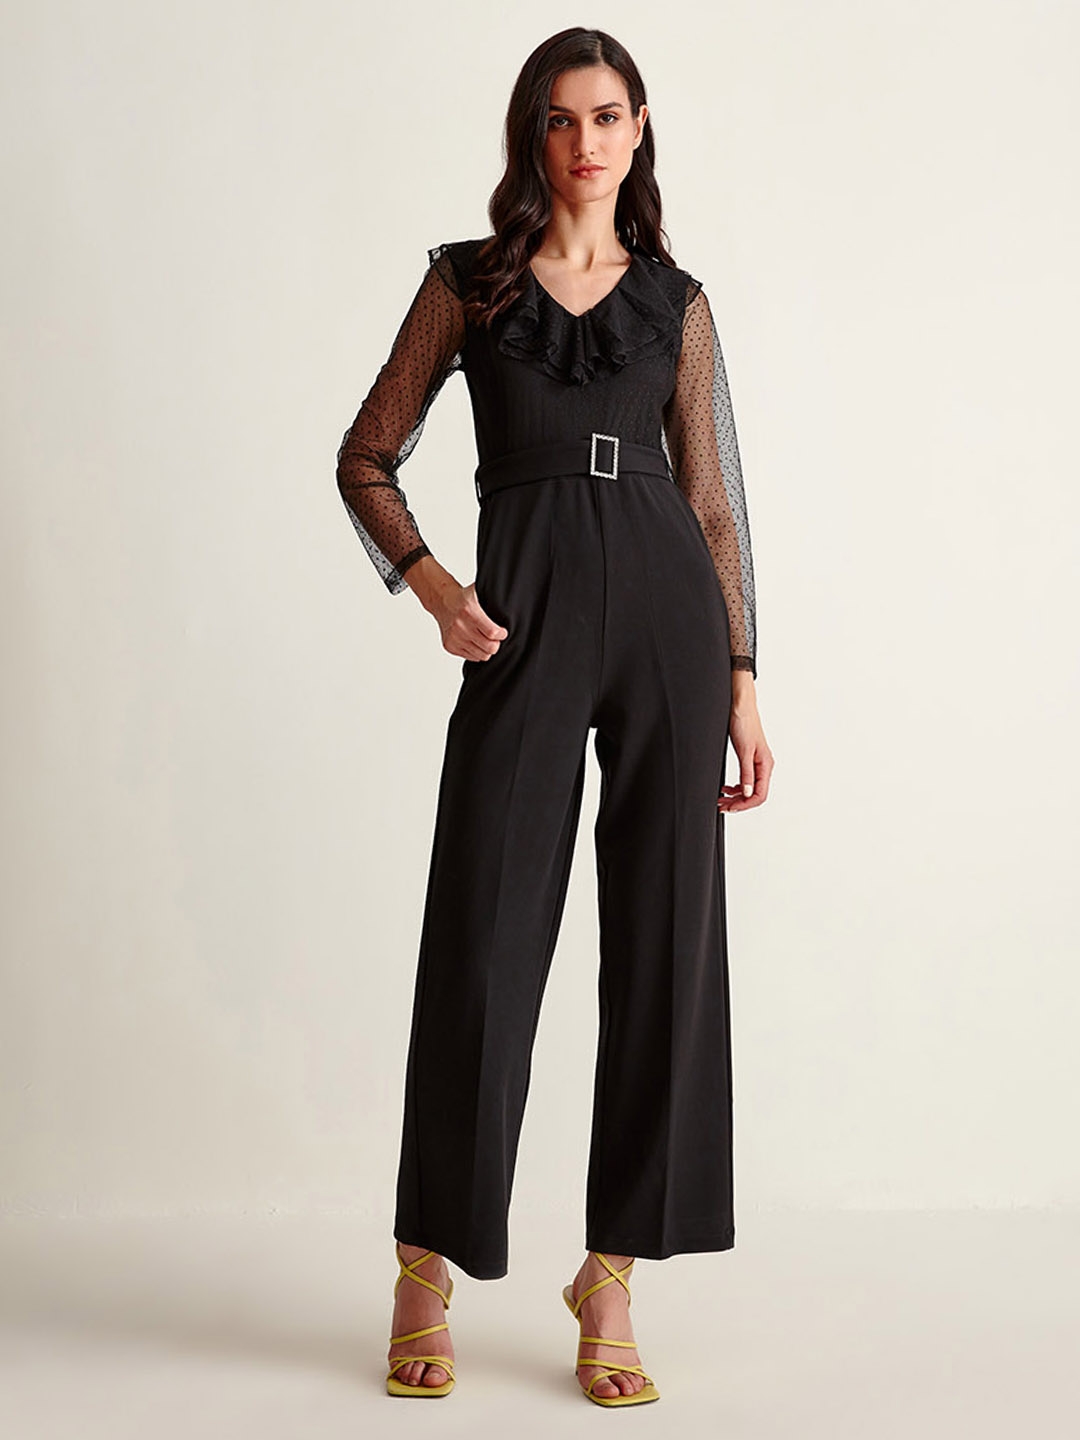 Buy COVER STORY Rust Surplice Jumpsuit with Belt (Set of 2) online